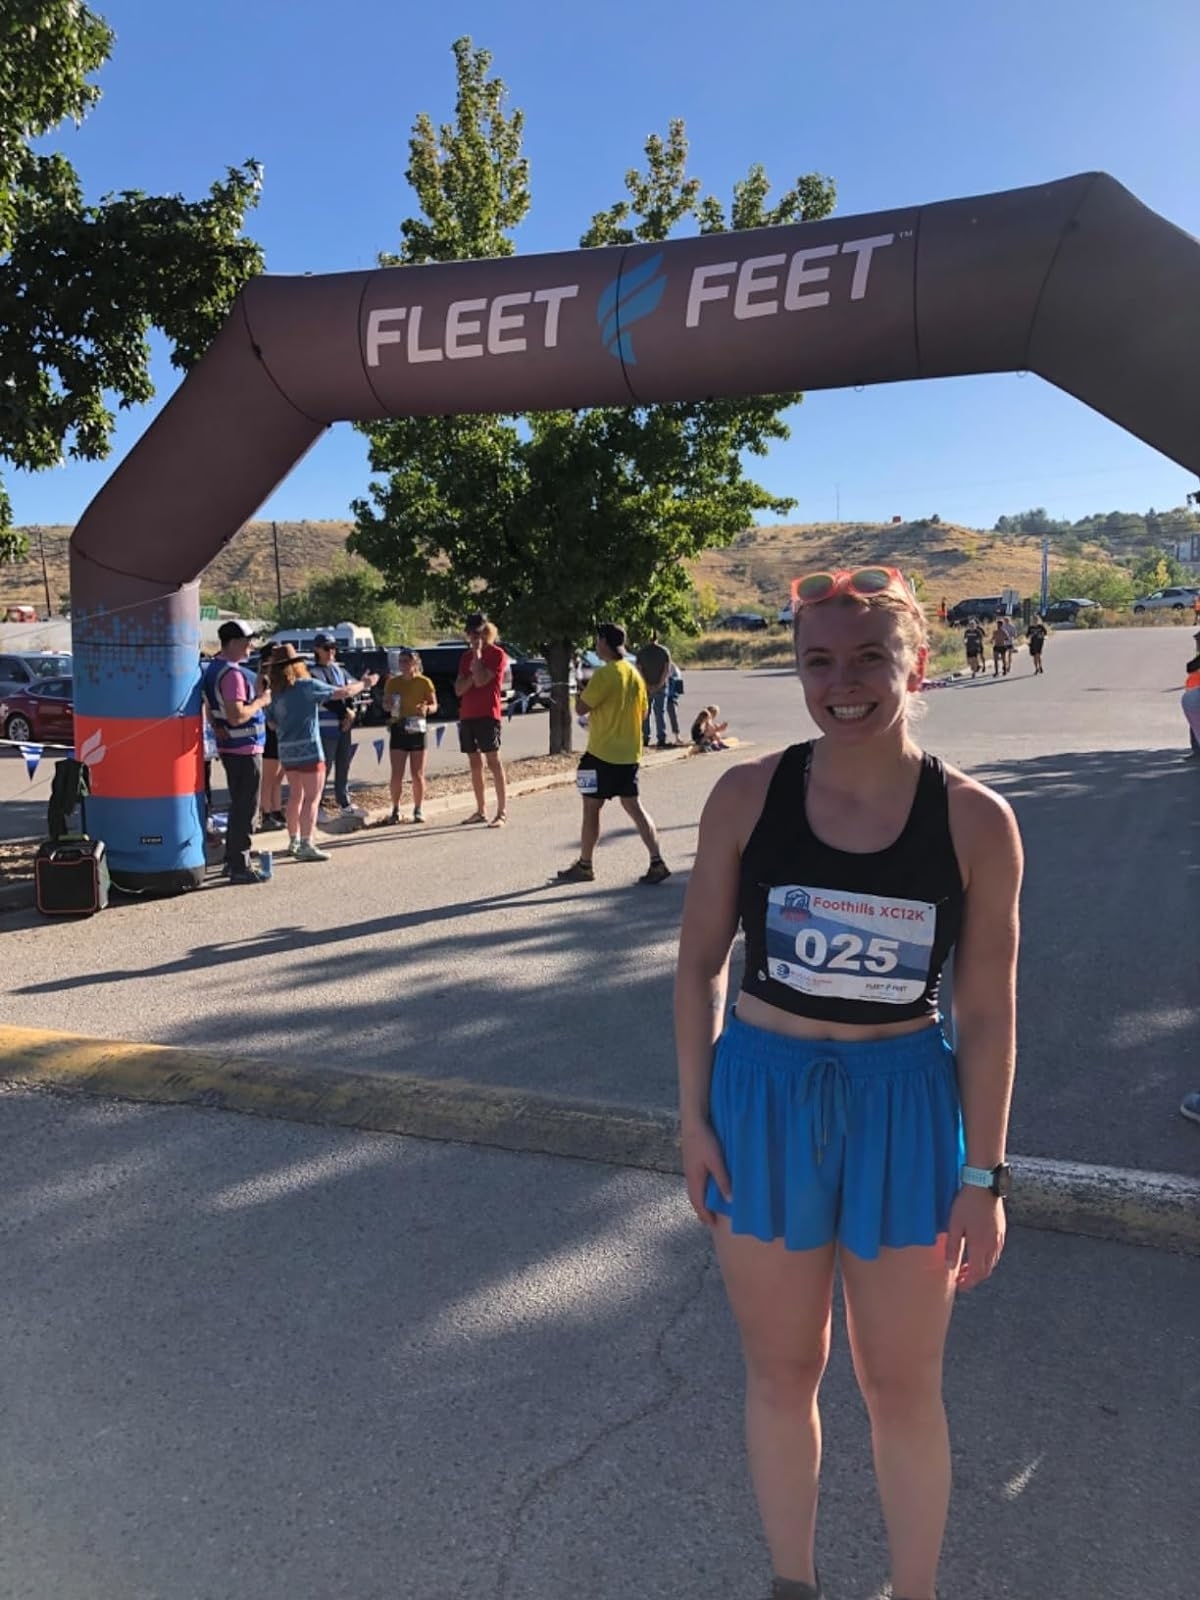 Reviewer in athletic wear smiling at a start line under a &#x27;Fleet Feet&#x27; arch, ready for a race